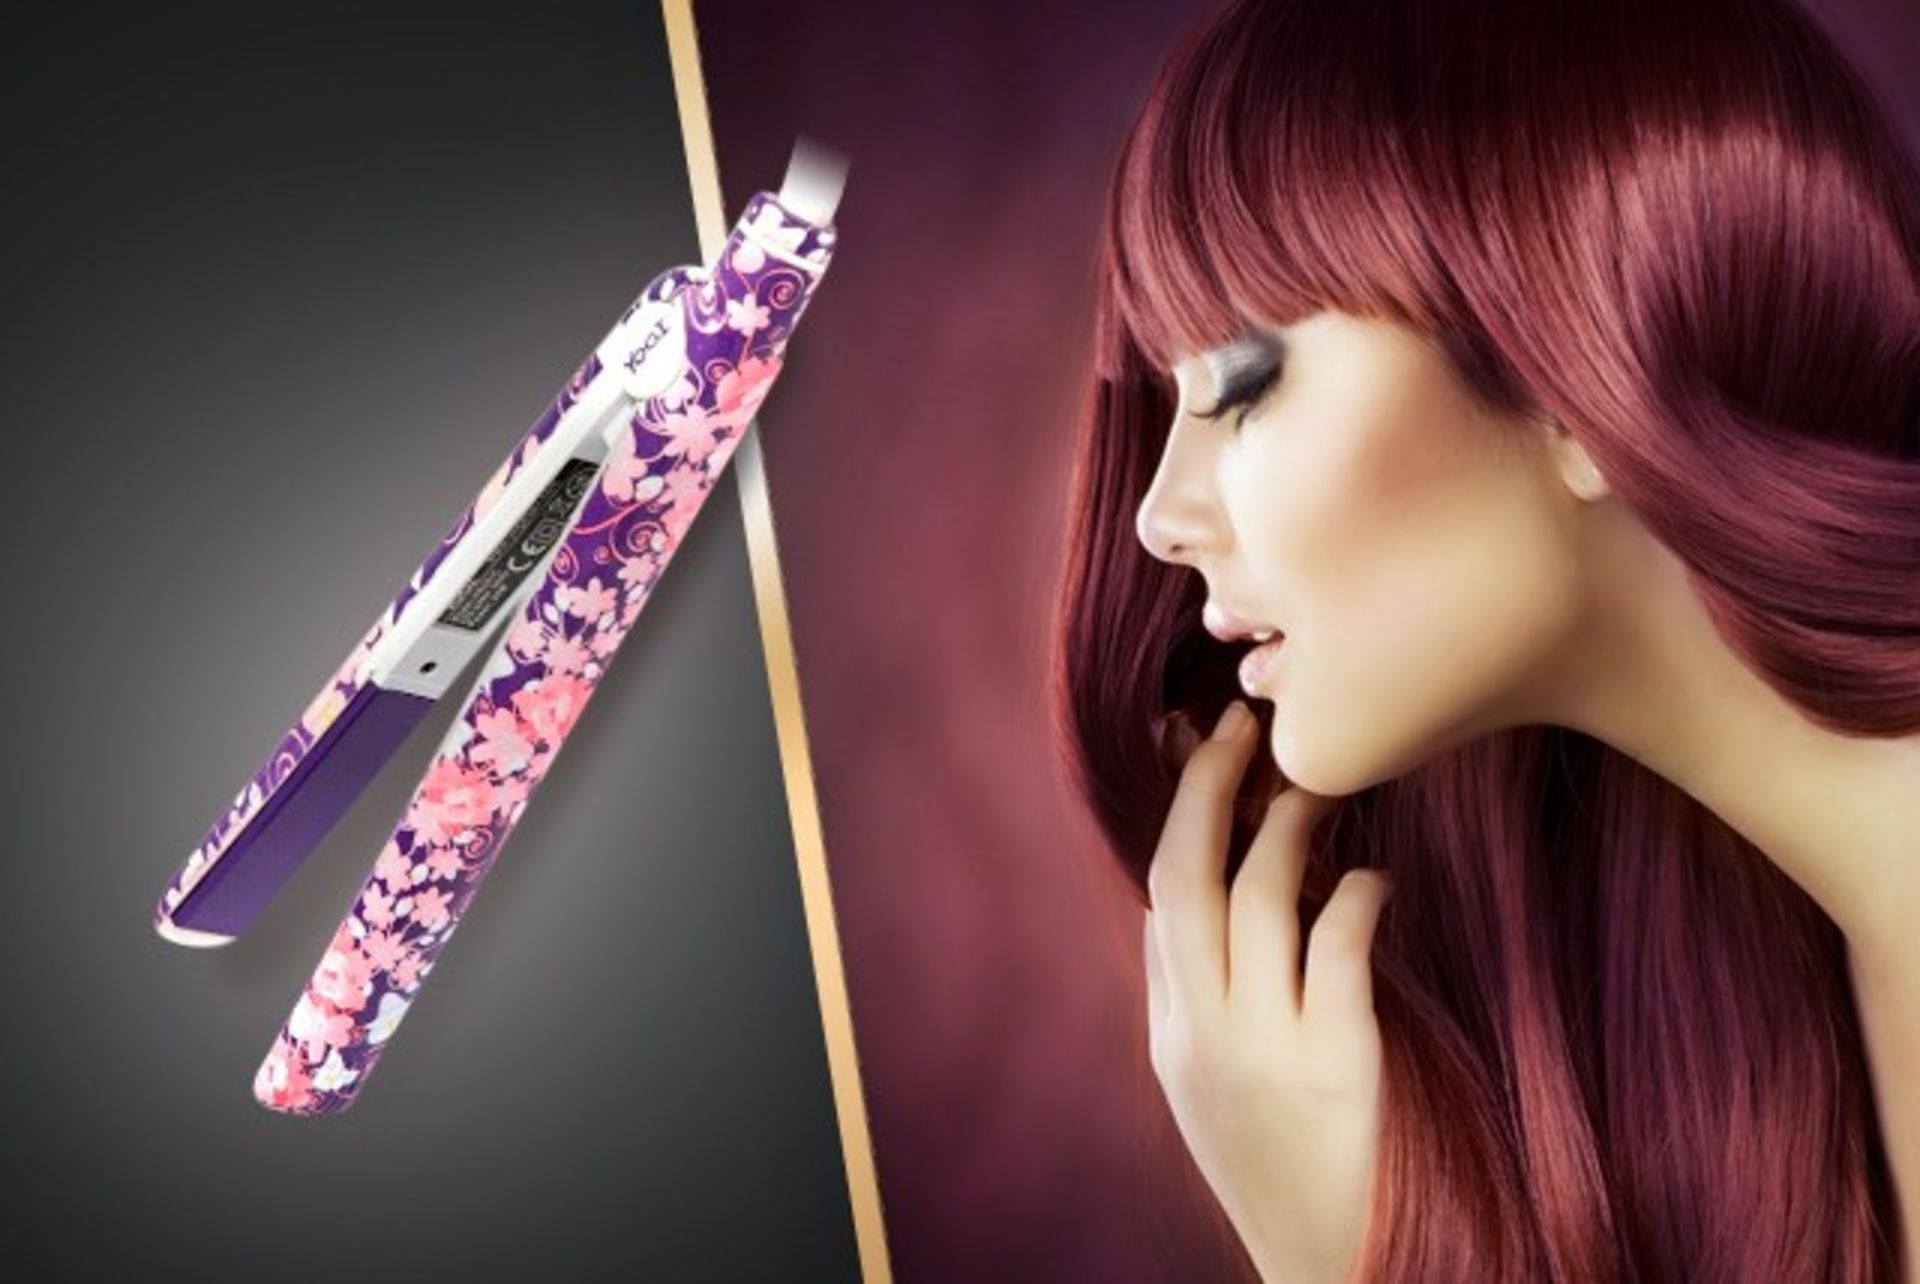 V Brand New Yogi Hair Straighteners With Ceramic & Tourmaline Infuded Floating Plates - Variable - Image 2 of 2